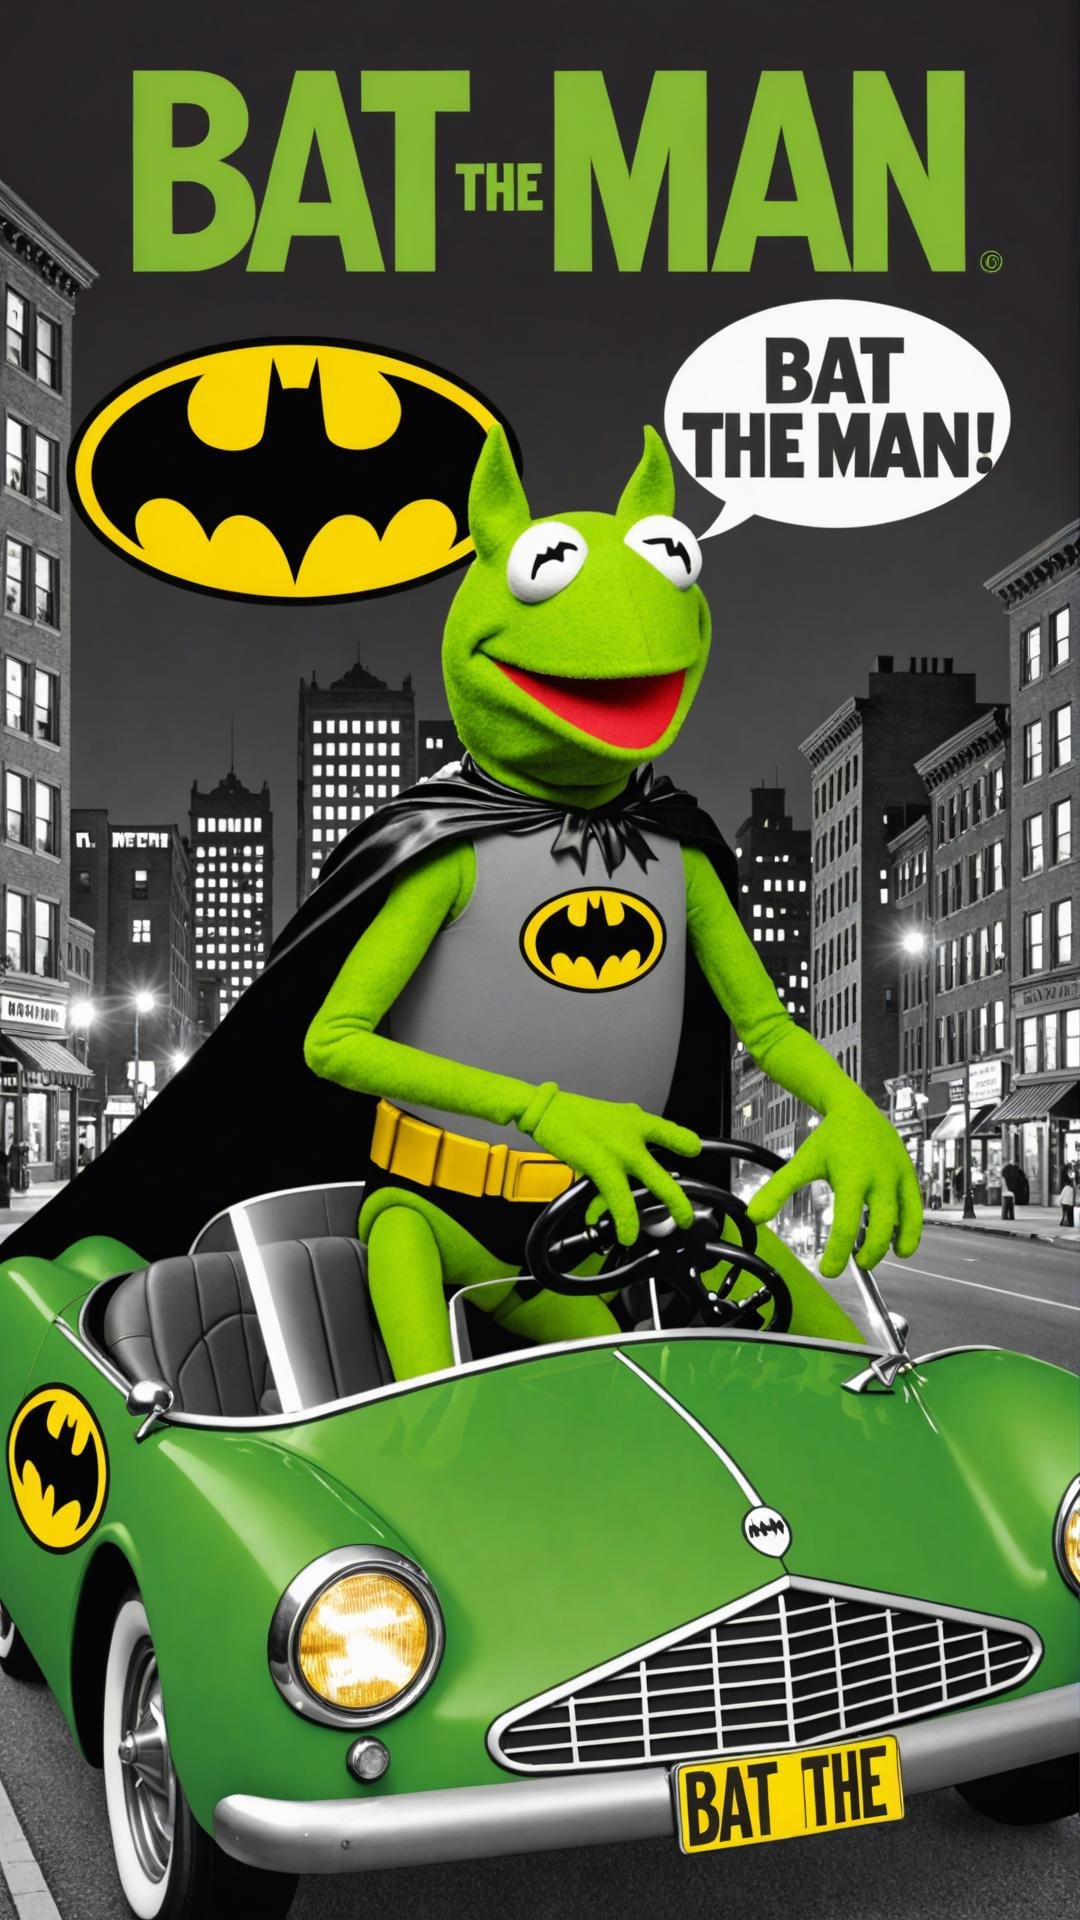 Black and white and green Photo of Kermit the frog dressed as batman driving batmobile in city at night with text bubble that says "BAT the MAN"